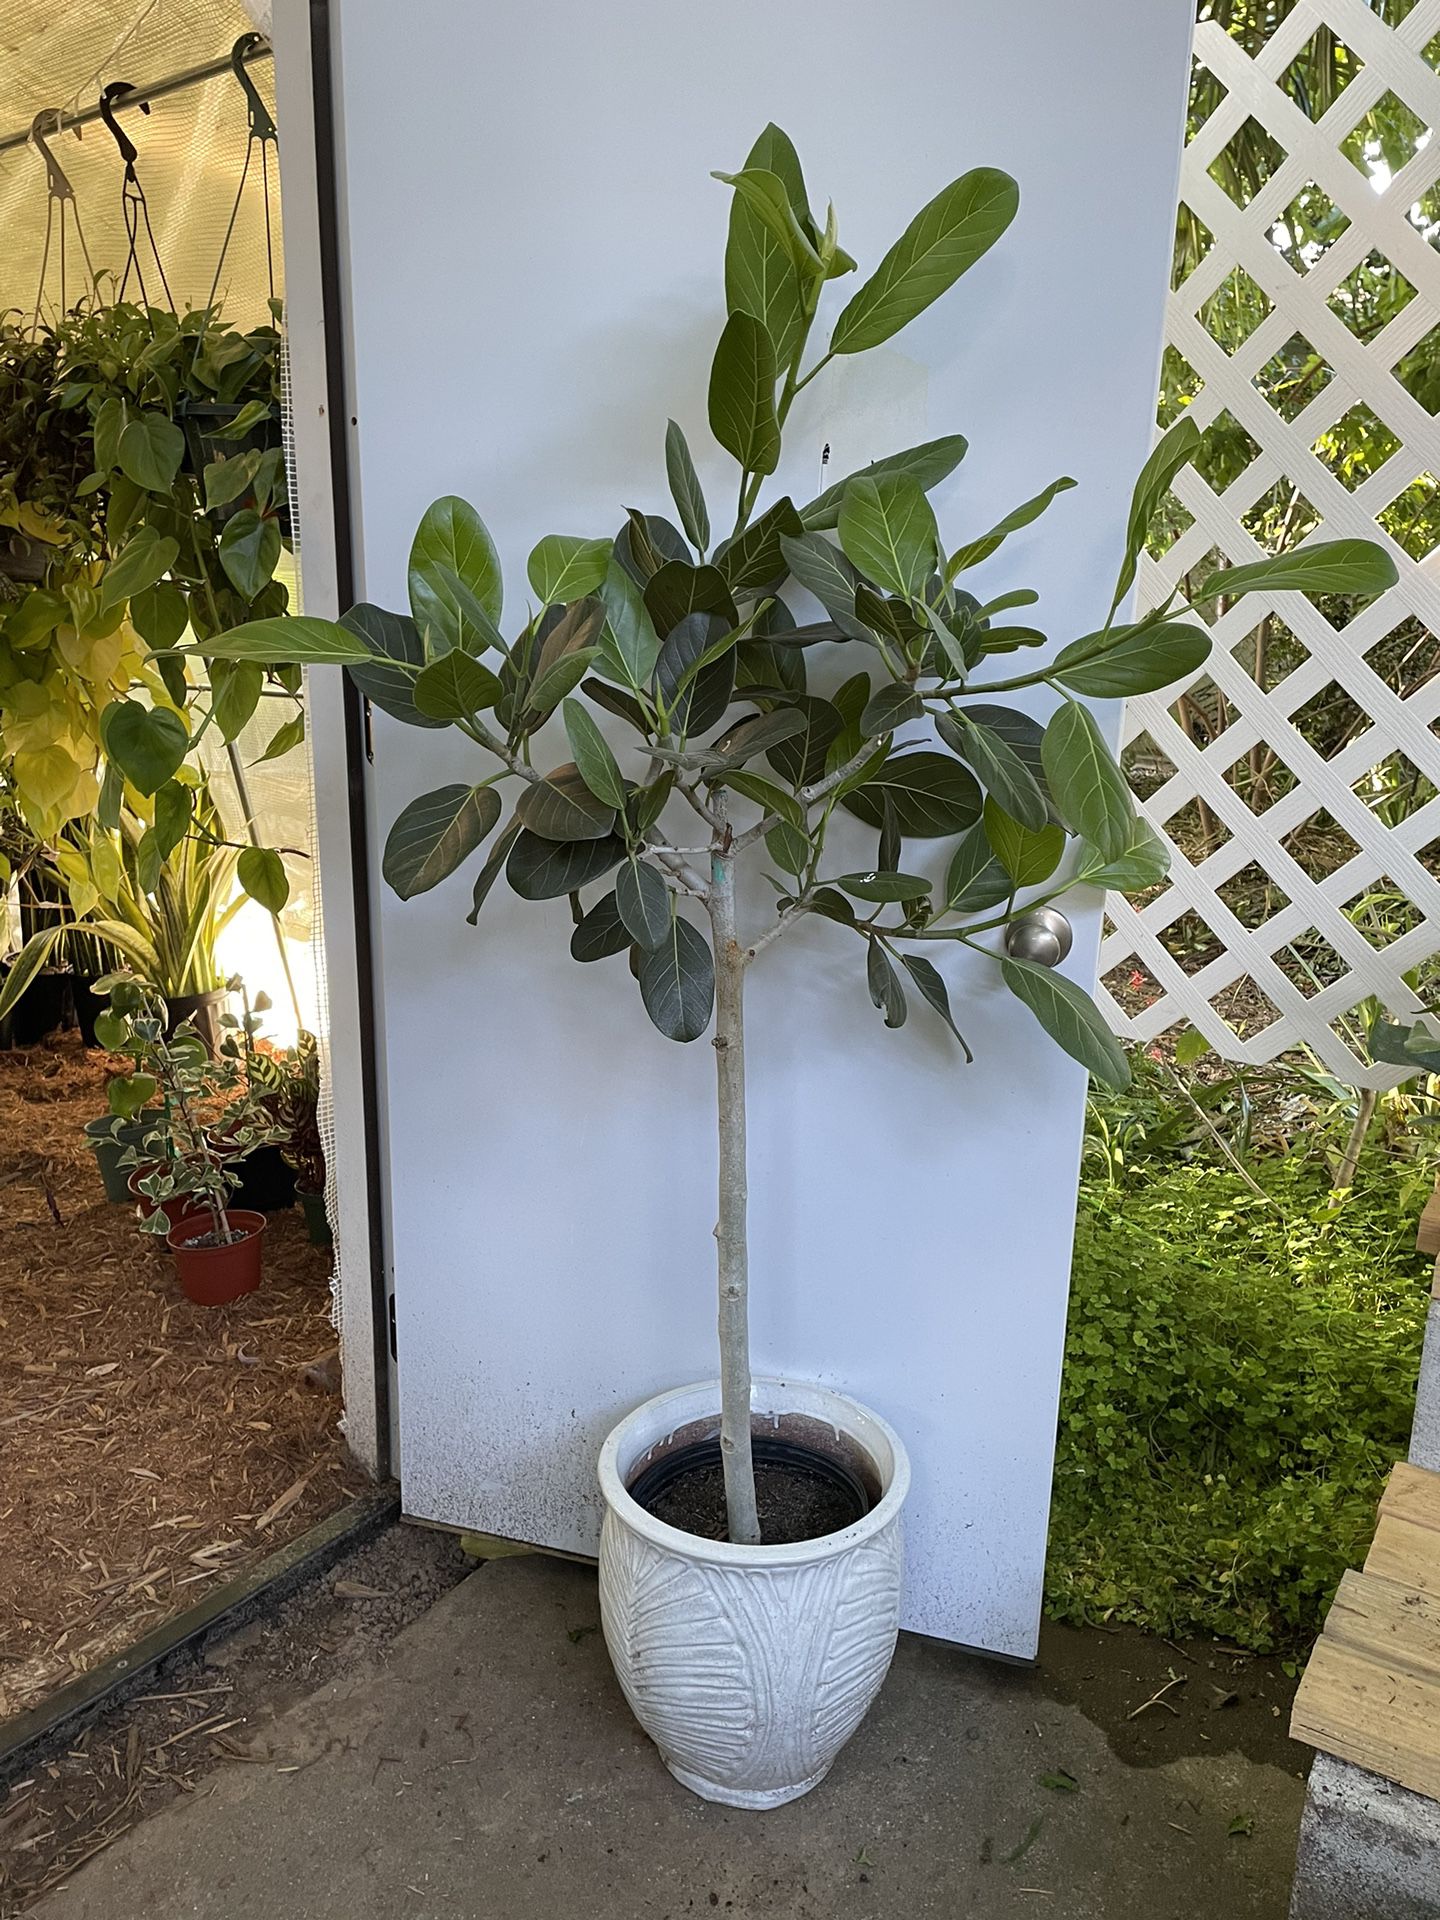 5ft Ficus Audrey, Exact Plant, White Ceramic Pot Not Included; 95820